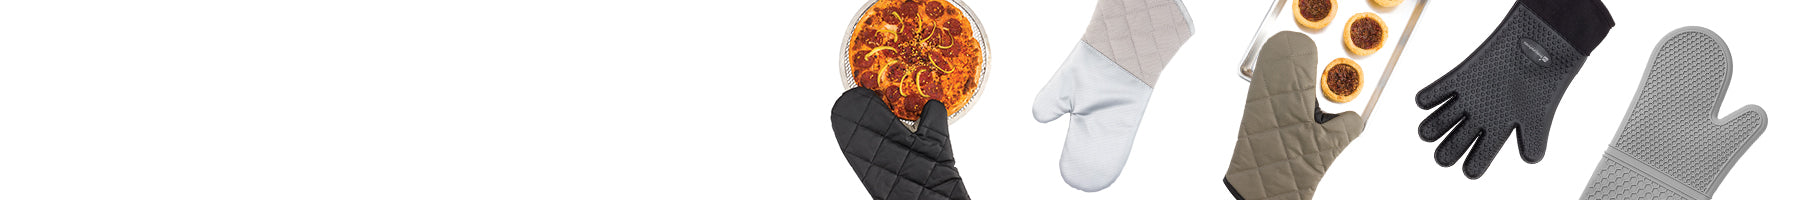 Banner_Smallwares_Oven-Mitts_325